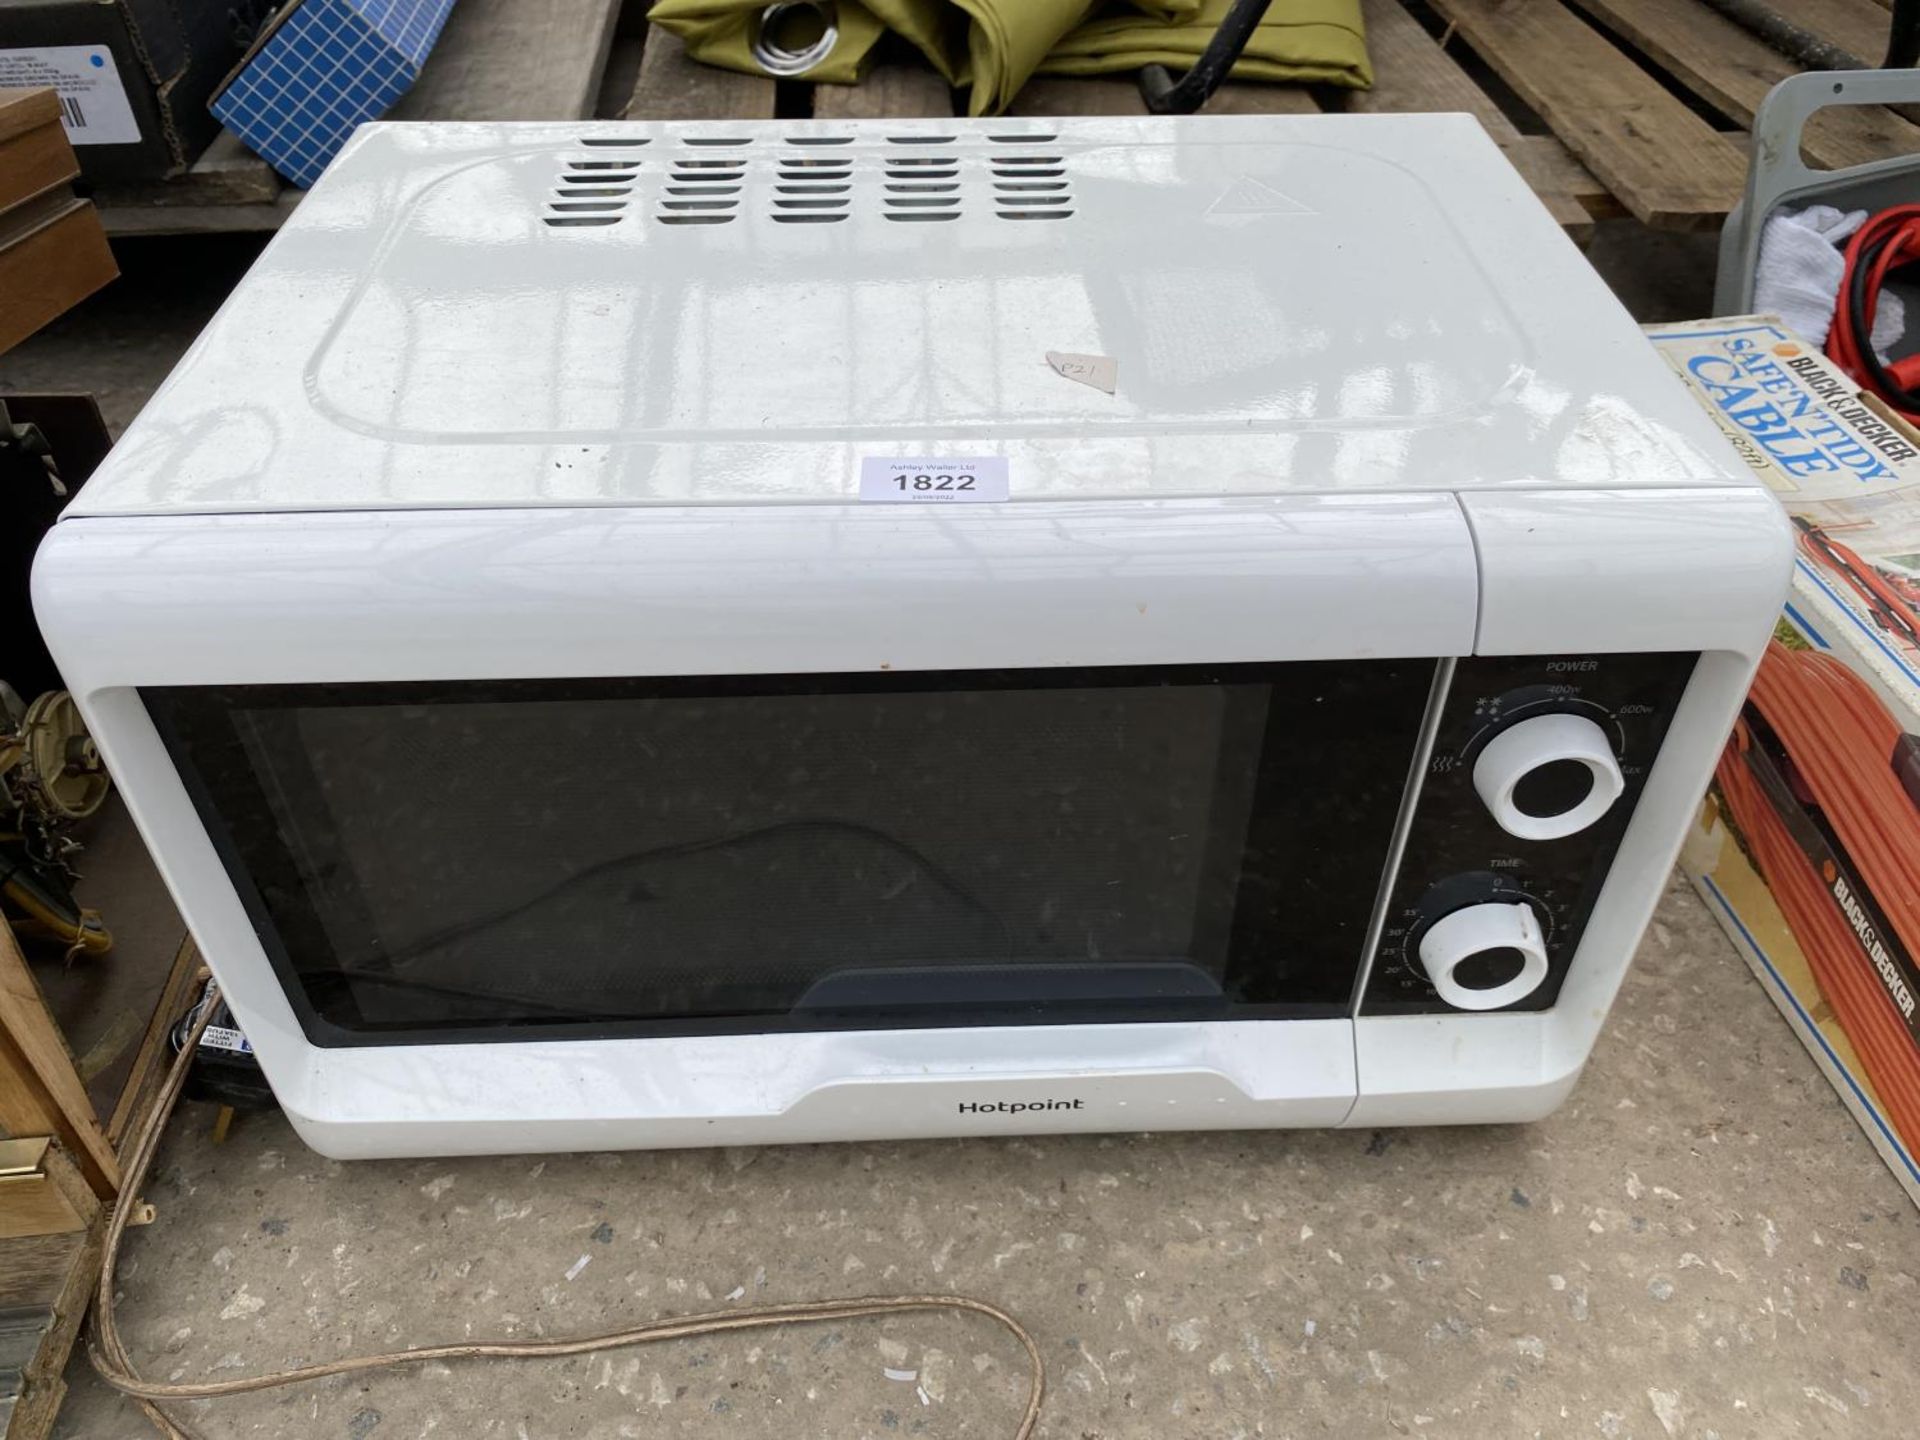 A WHITE HOTPOINT MICROWAVE OVEN